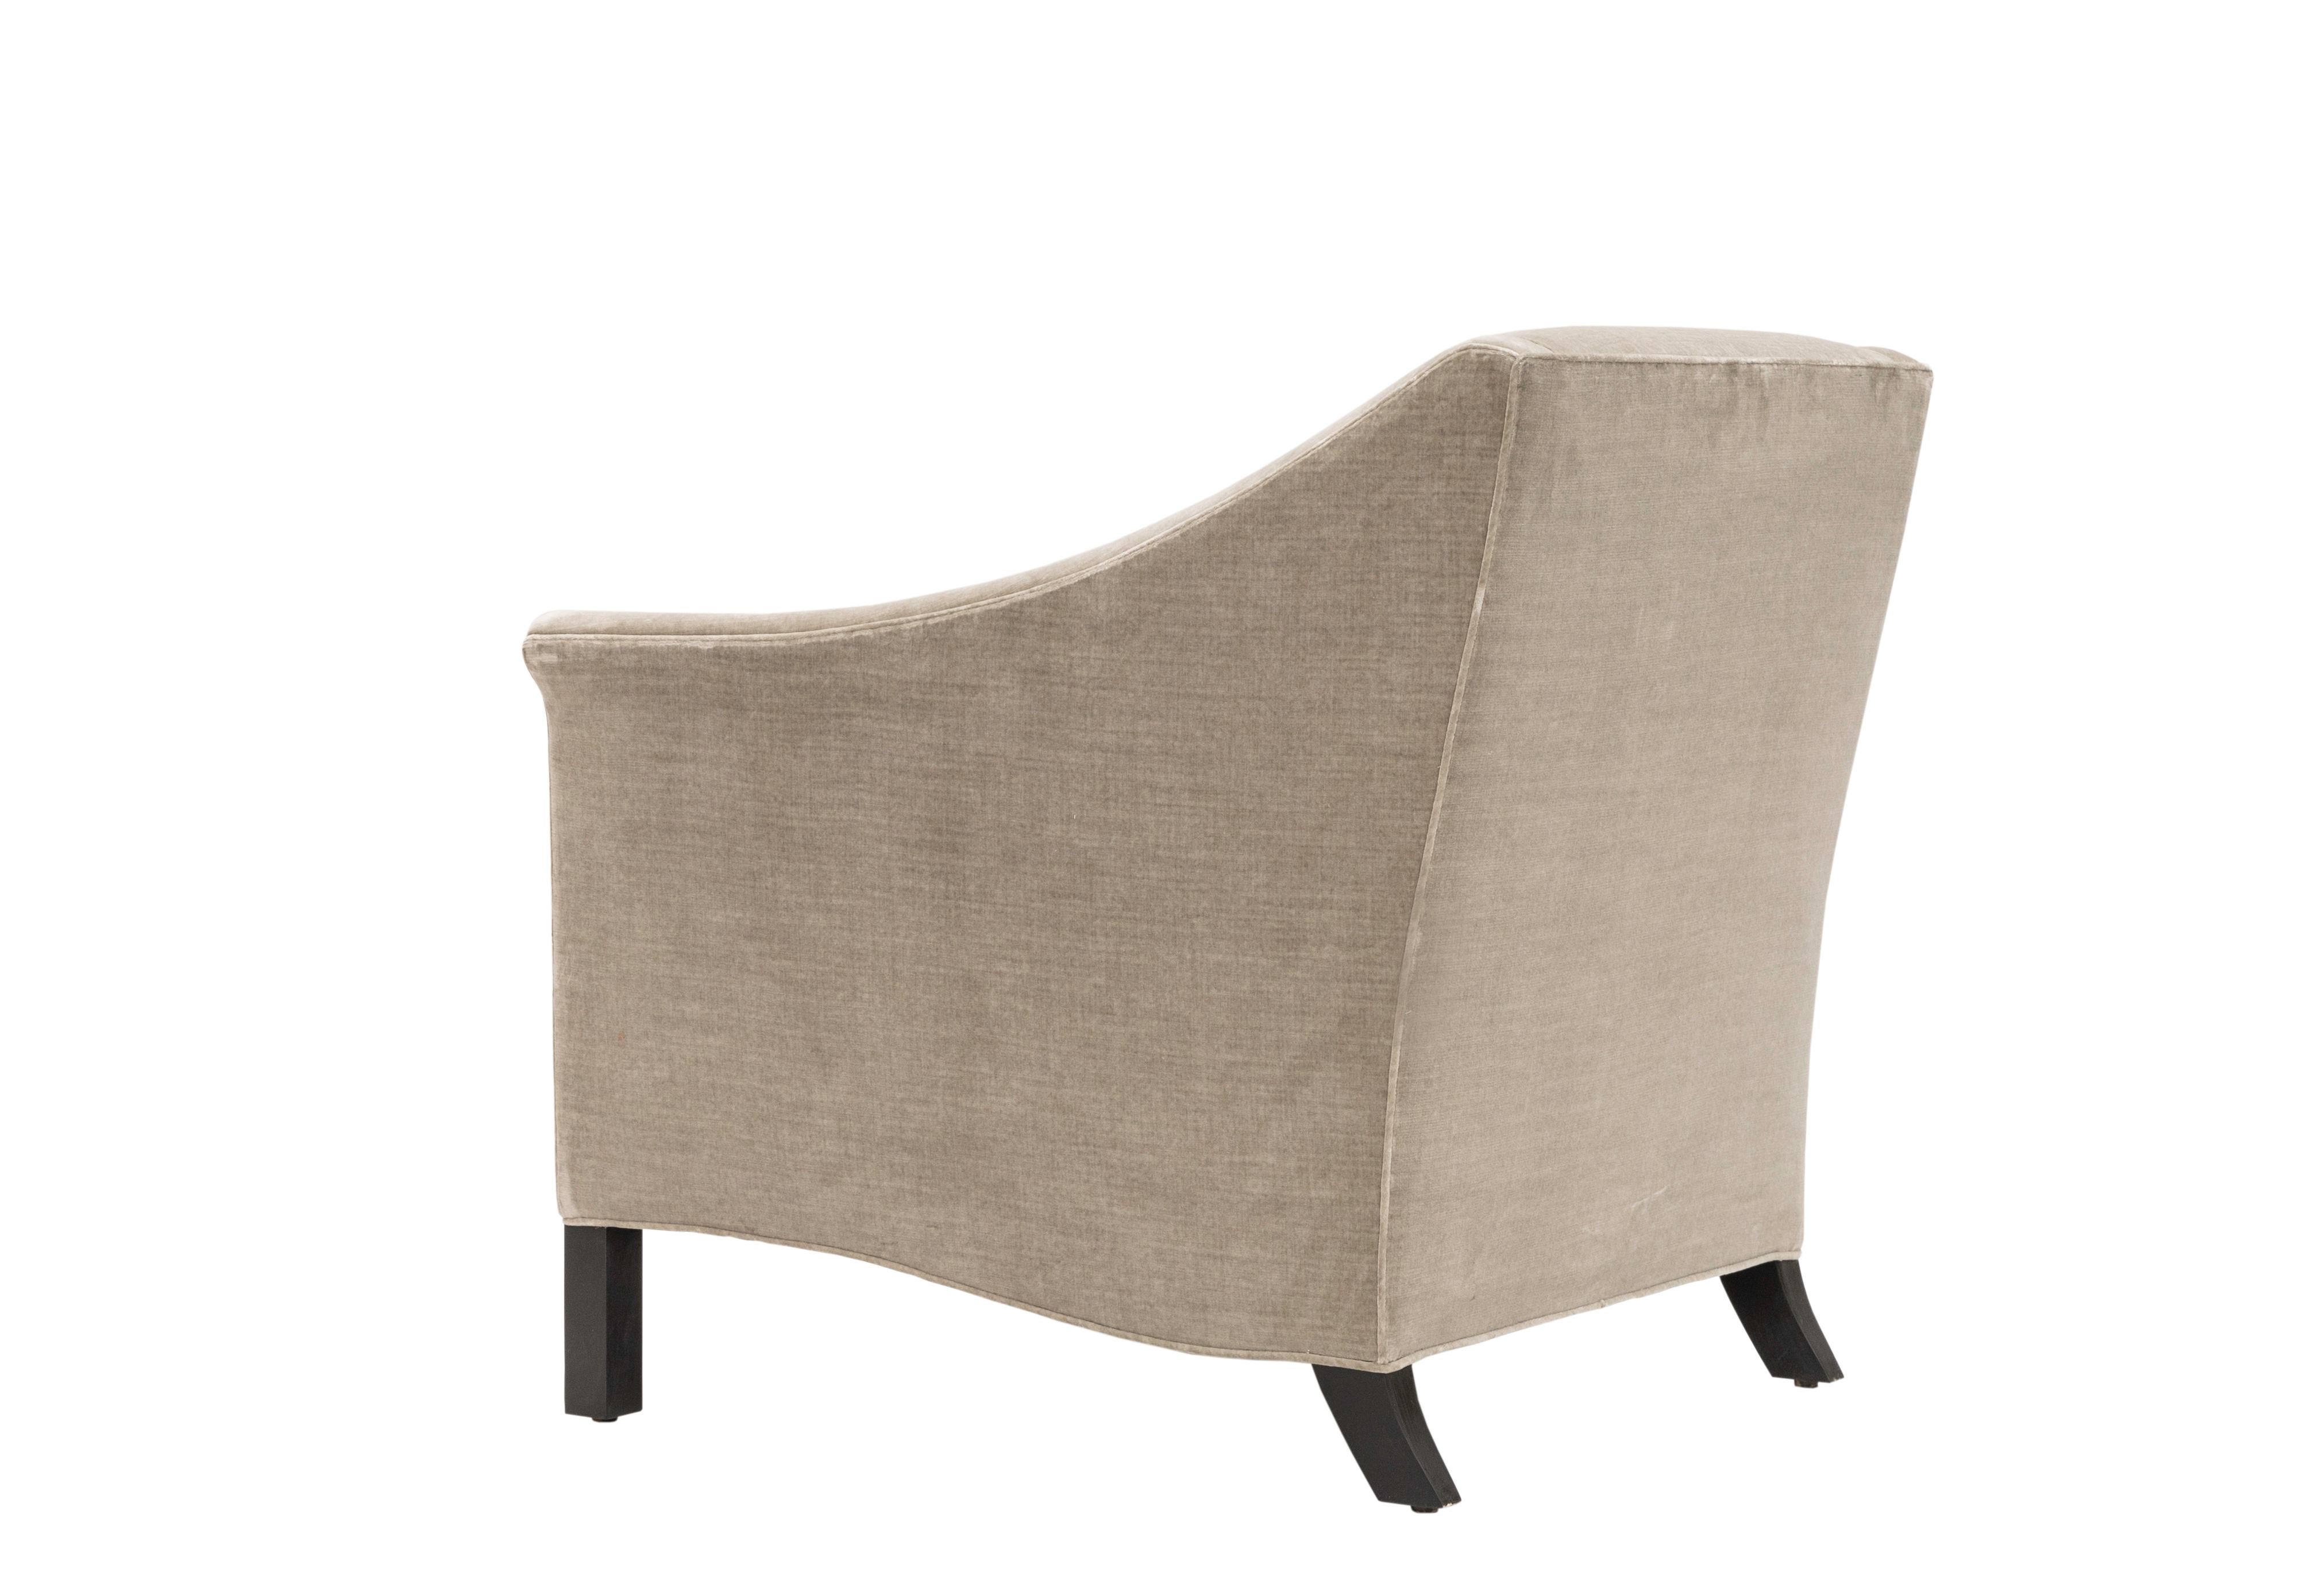 The Isabelle chair has a tight upholstered back and loose seat cushion. Squared front legs and curved back legs are made of blackened hardwood.

This Isabelle chair is a made to order item and hand crafted in the US. 
Customer's own material is